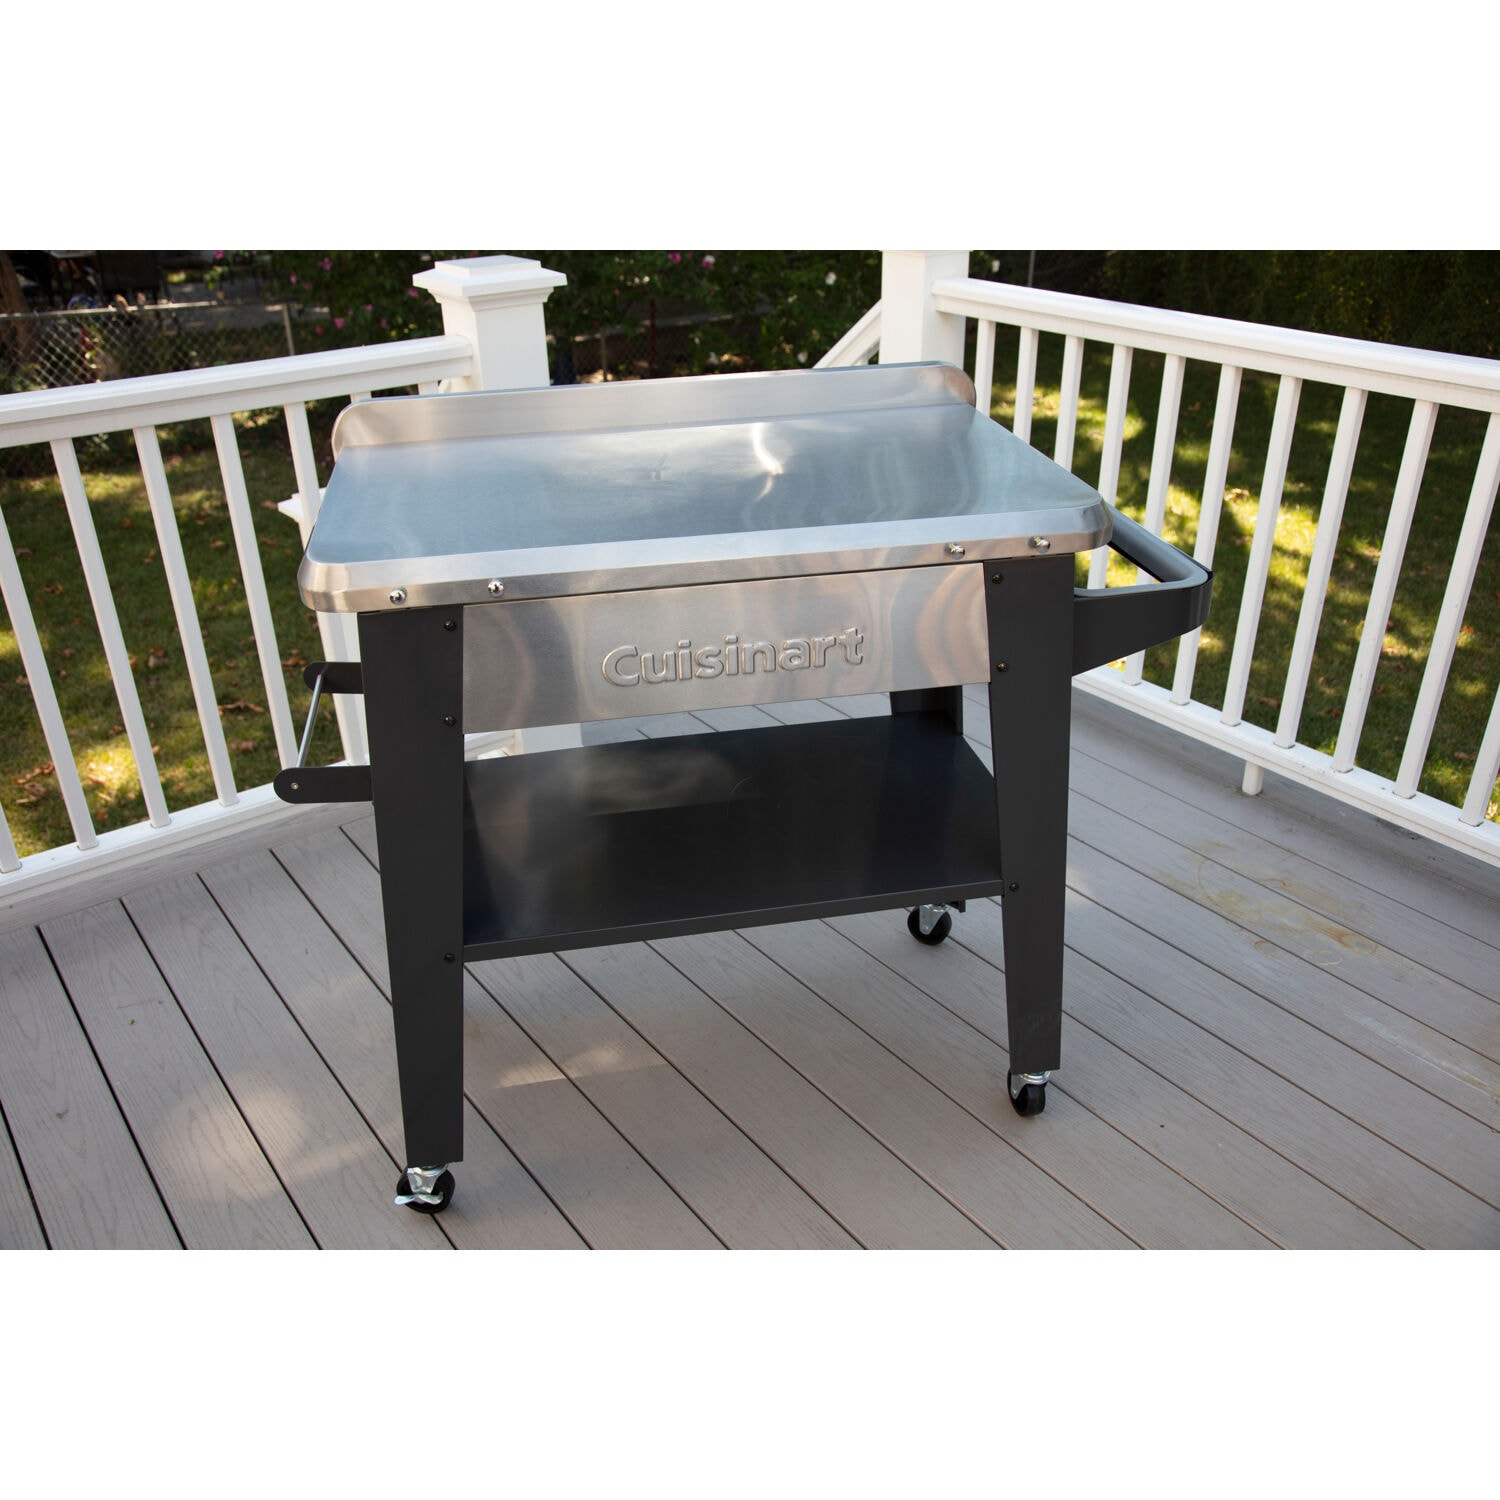 Prep station Grills & Outdoor Cooking at